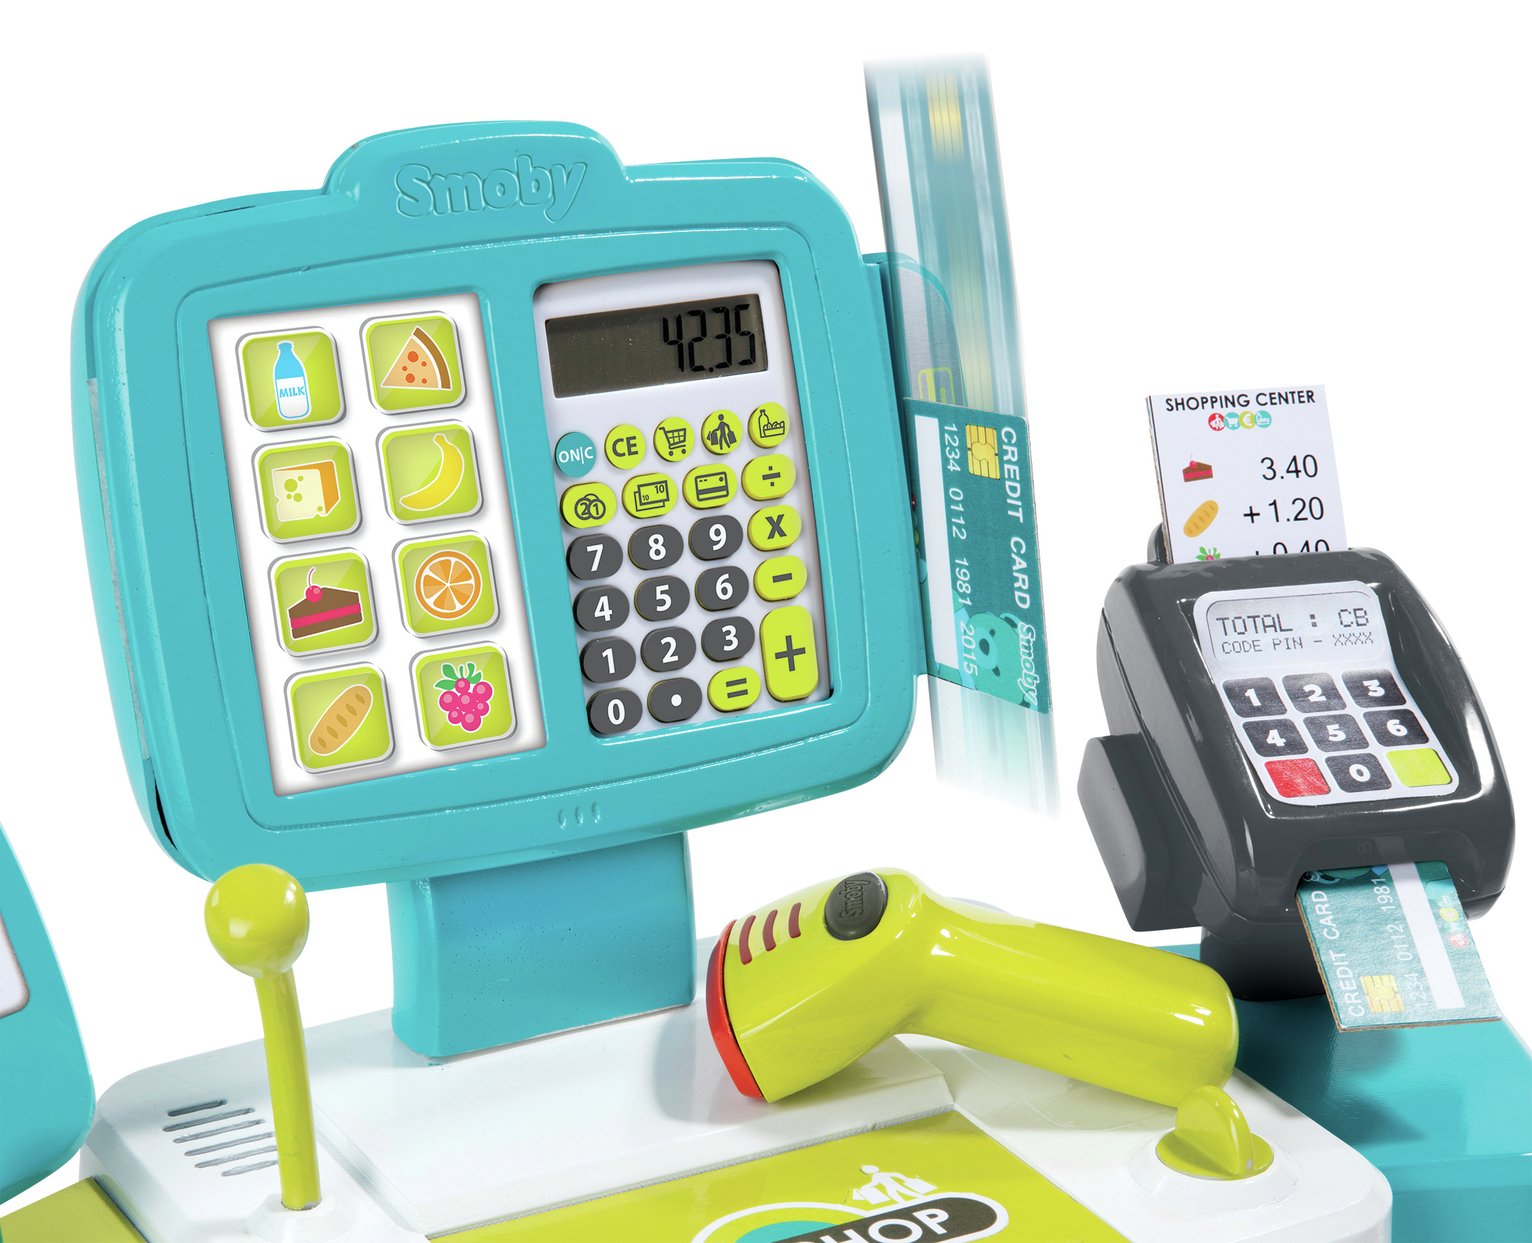 Smoby Large Cash Register Review